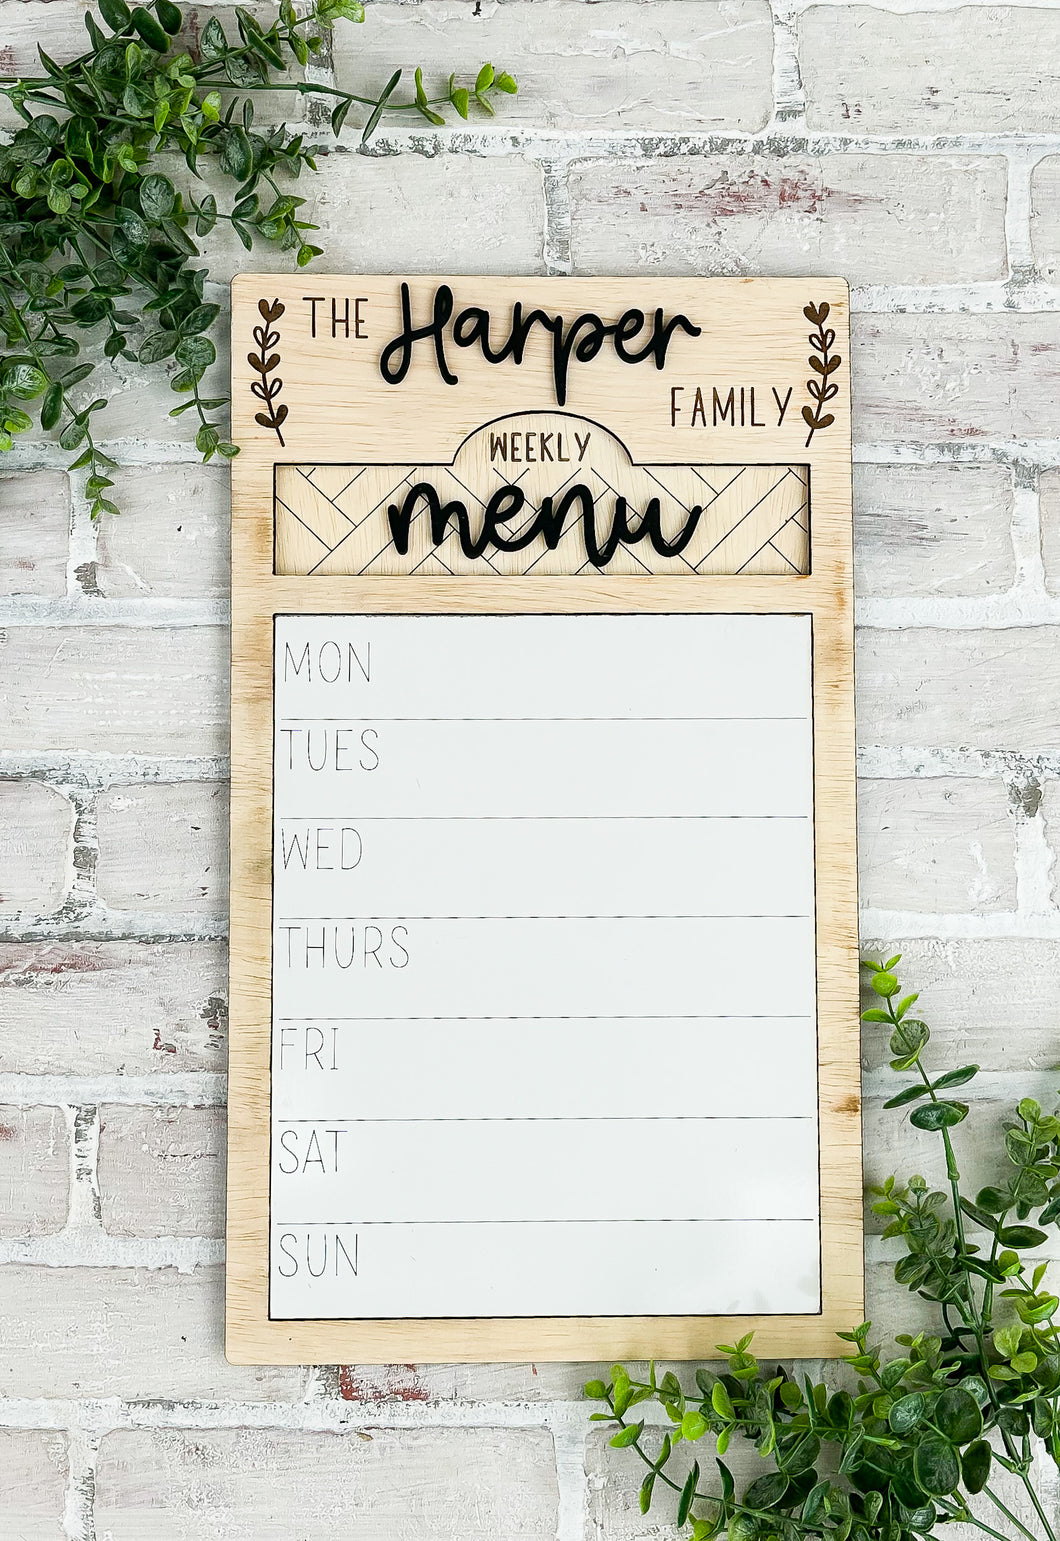 Personalized Marker Board Weekly Menu or To Do List - Kitchen Decor - Organization